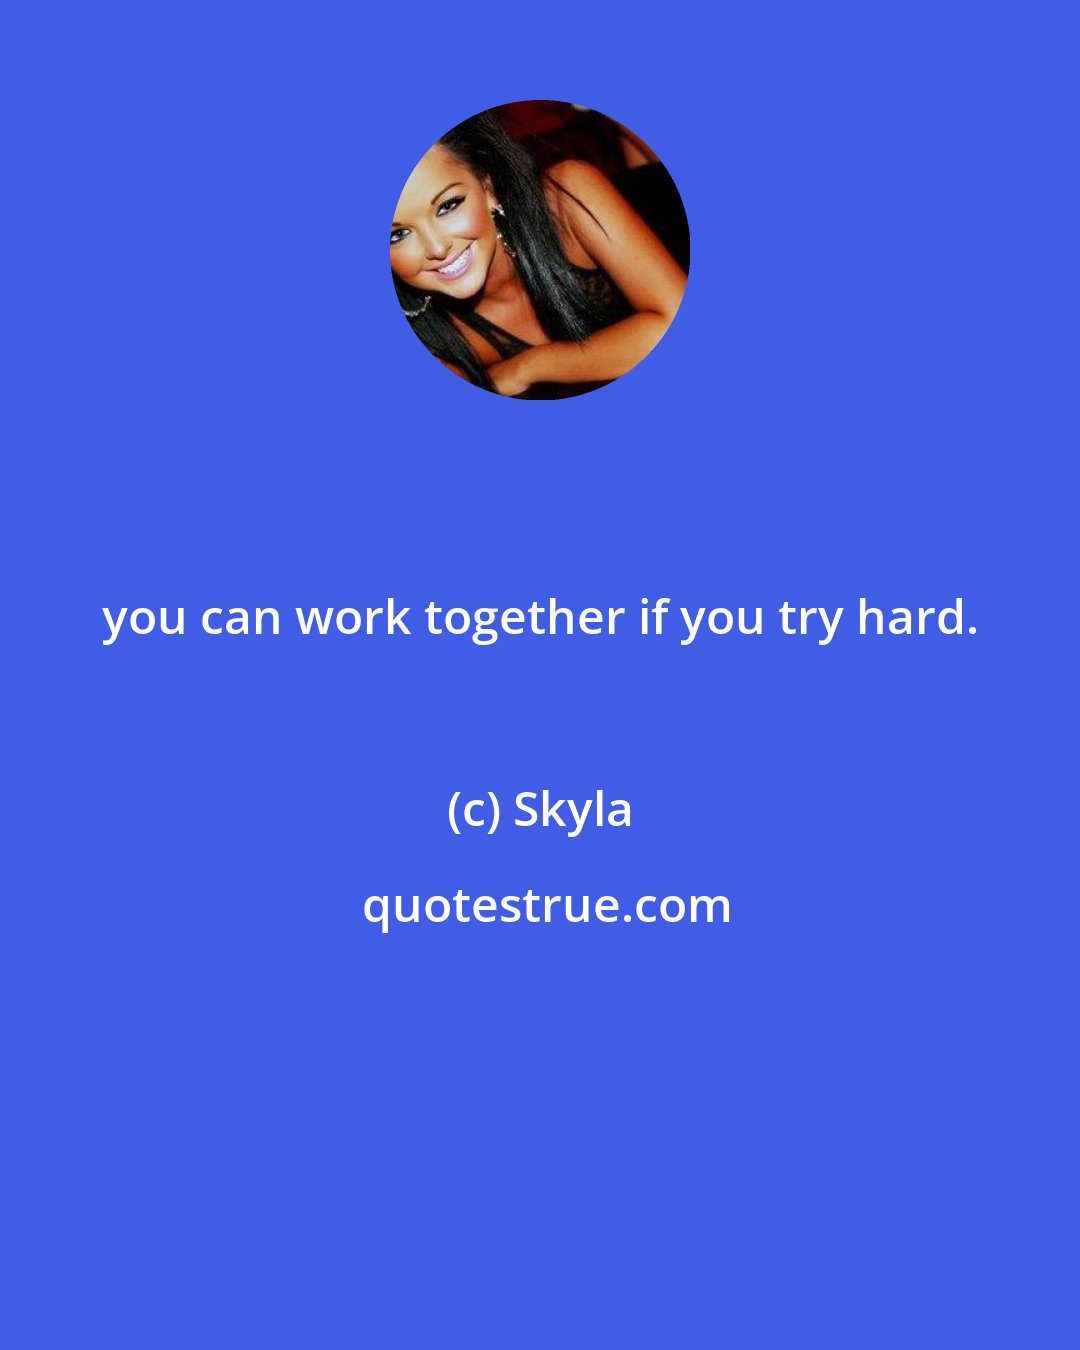 Skyla: you can work together if you try hard.